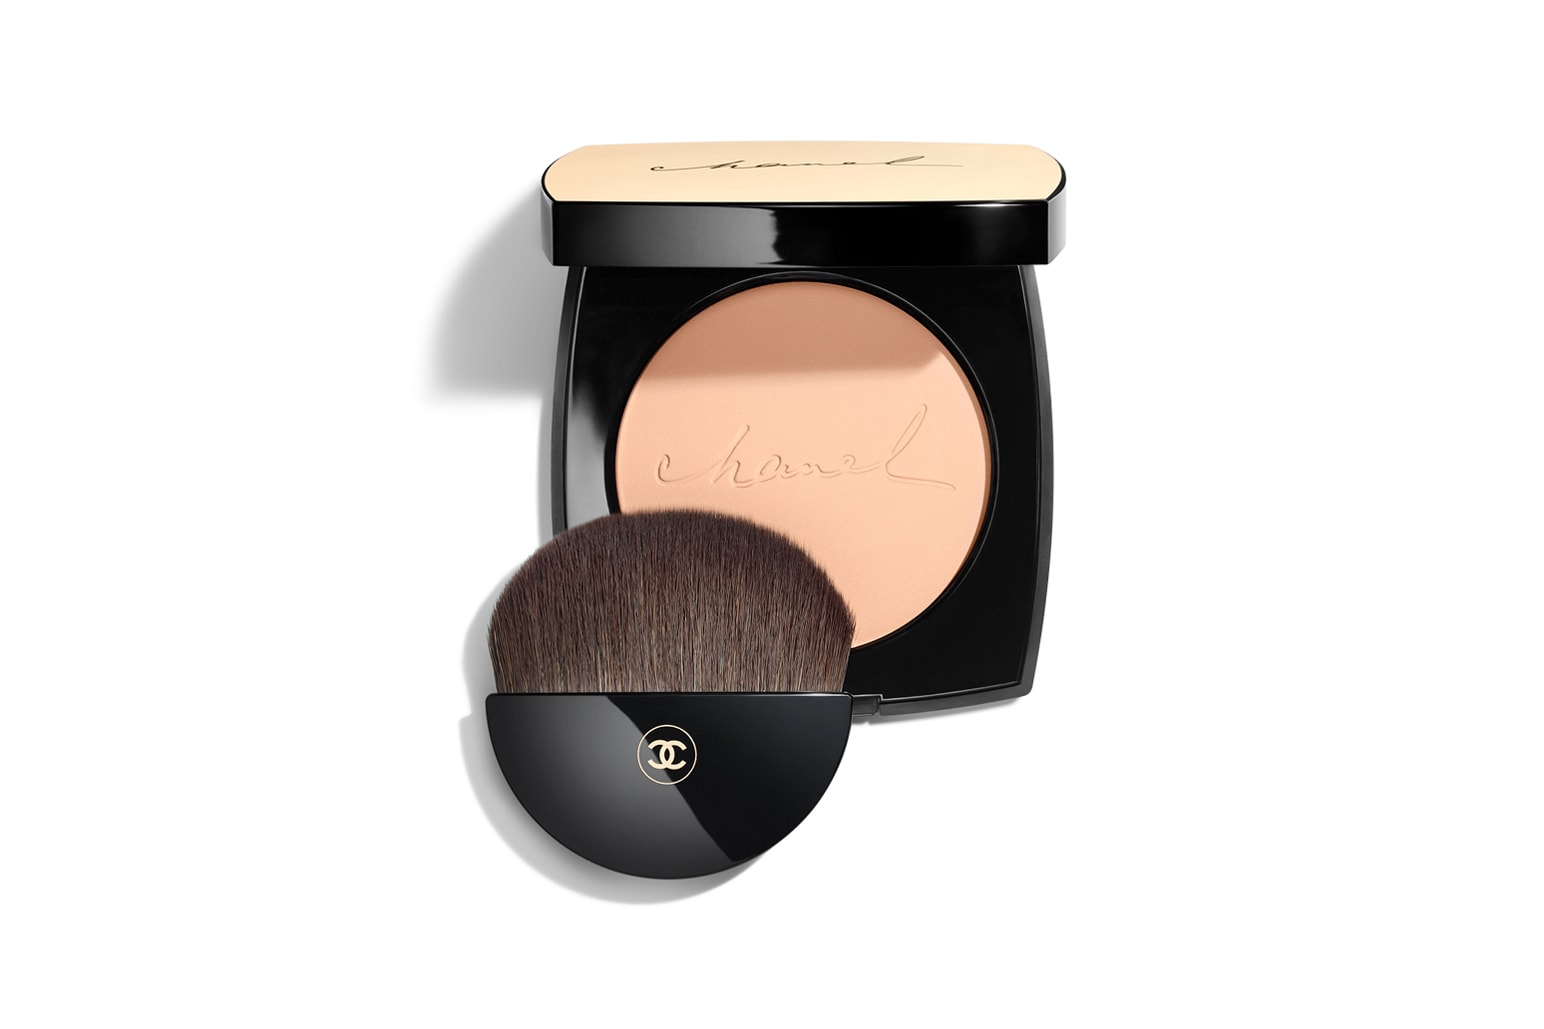 Chanel LES BEIGES 2019 Collection Sheer Powder